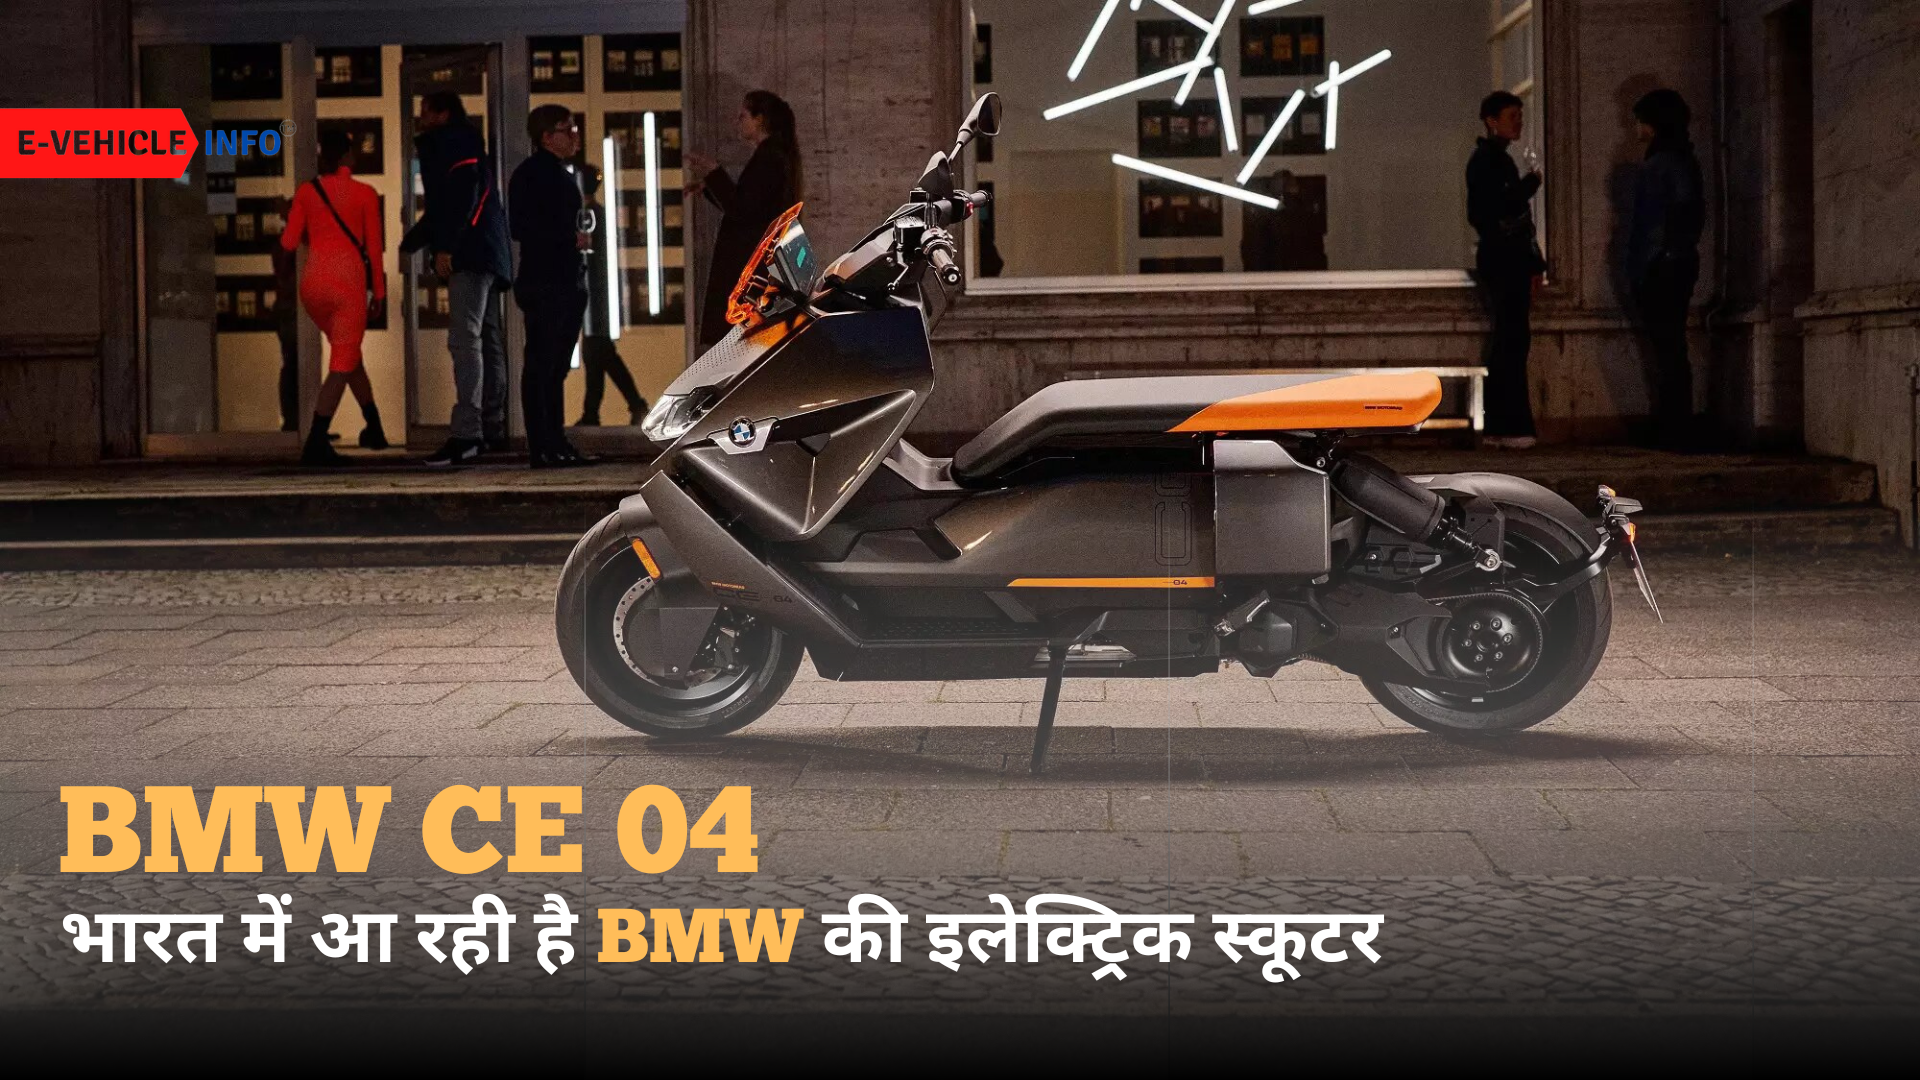 https://e-vehicleinfo.com/hindi/bmw-ce-04-electric-scooter/